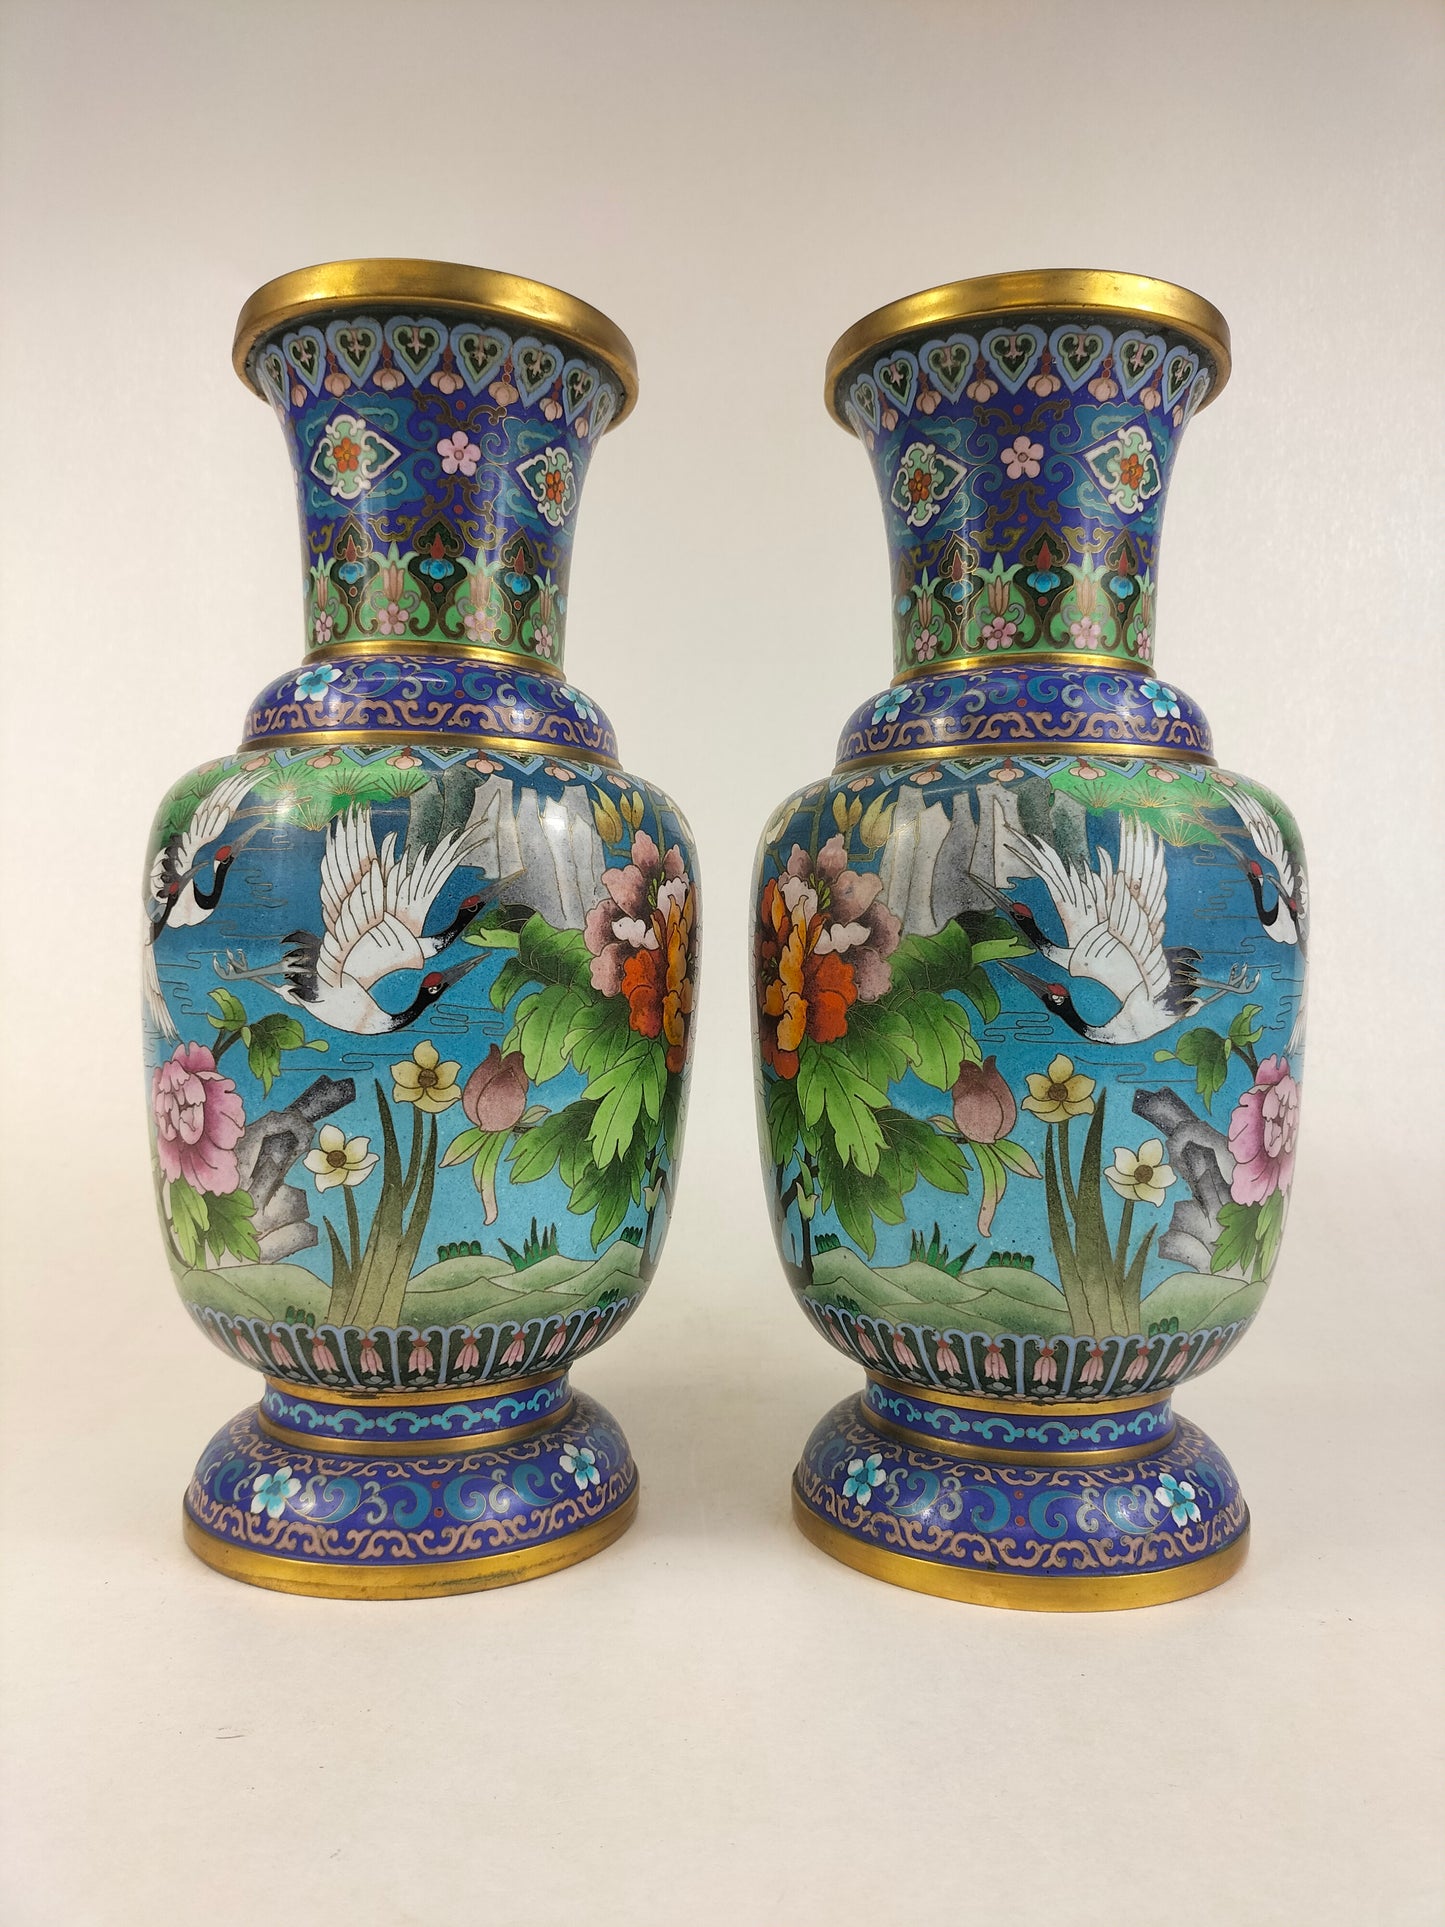 Pair of large Chinese cloisonne vases decorated with cranes // 20th century